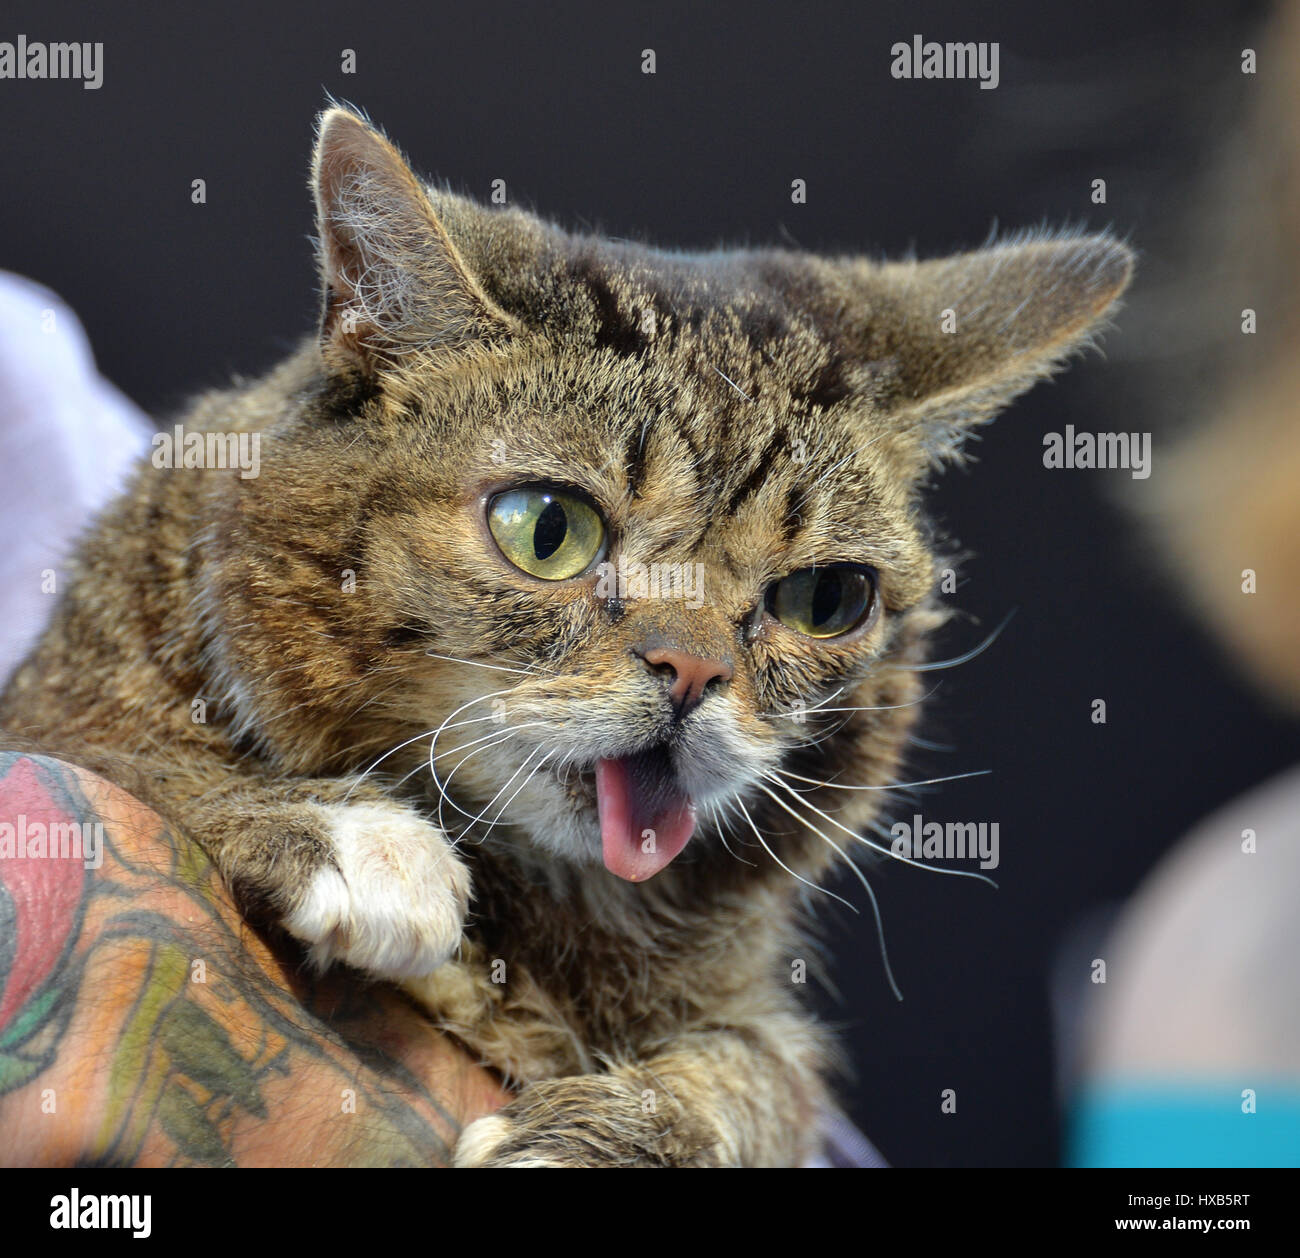 LOS ANGELES, CA. August 1, 2016: Animal actor Lil BUB at the world premiere of 'Nine Lives' at the TCL Chinese Theatre, Hollywood. EDITORIAL USE ONLY. Stock Photo